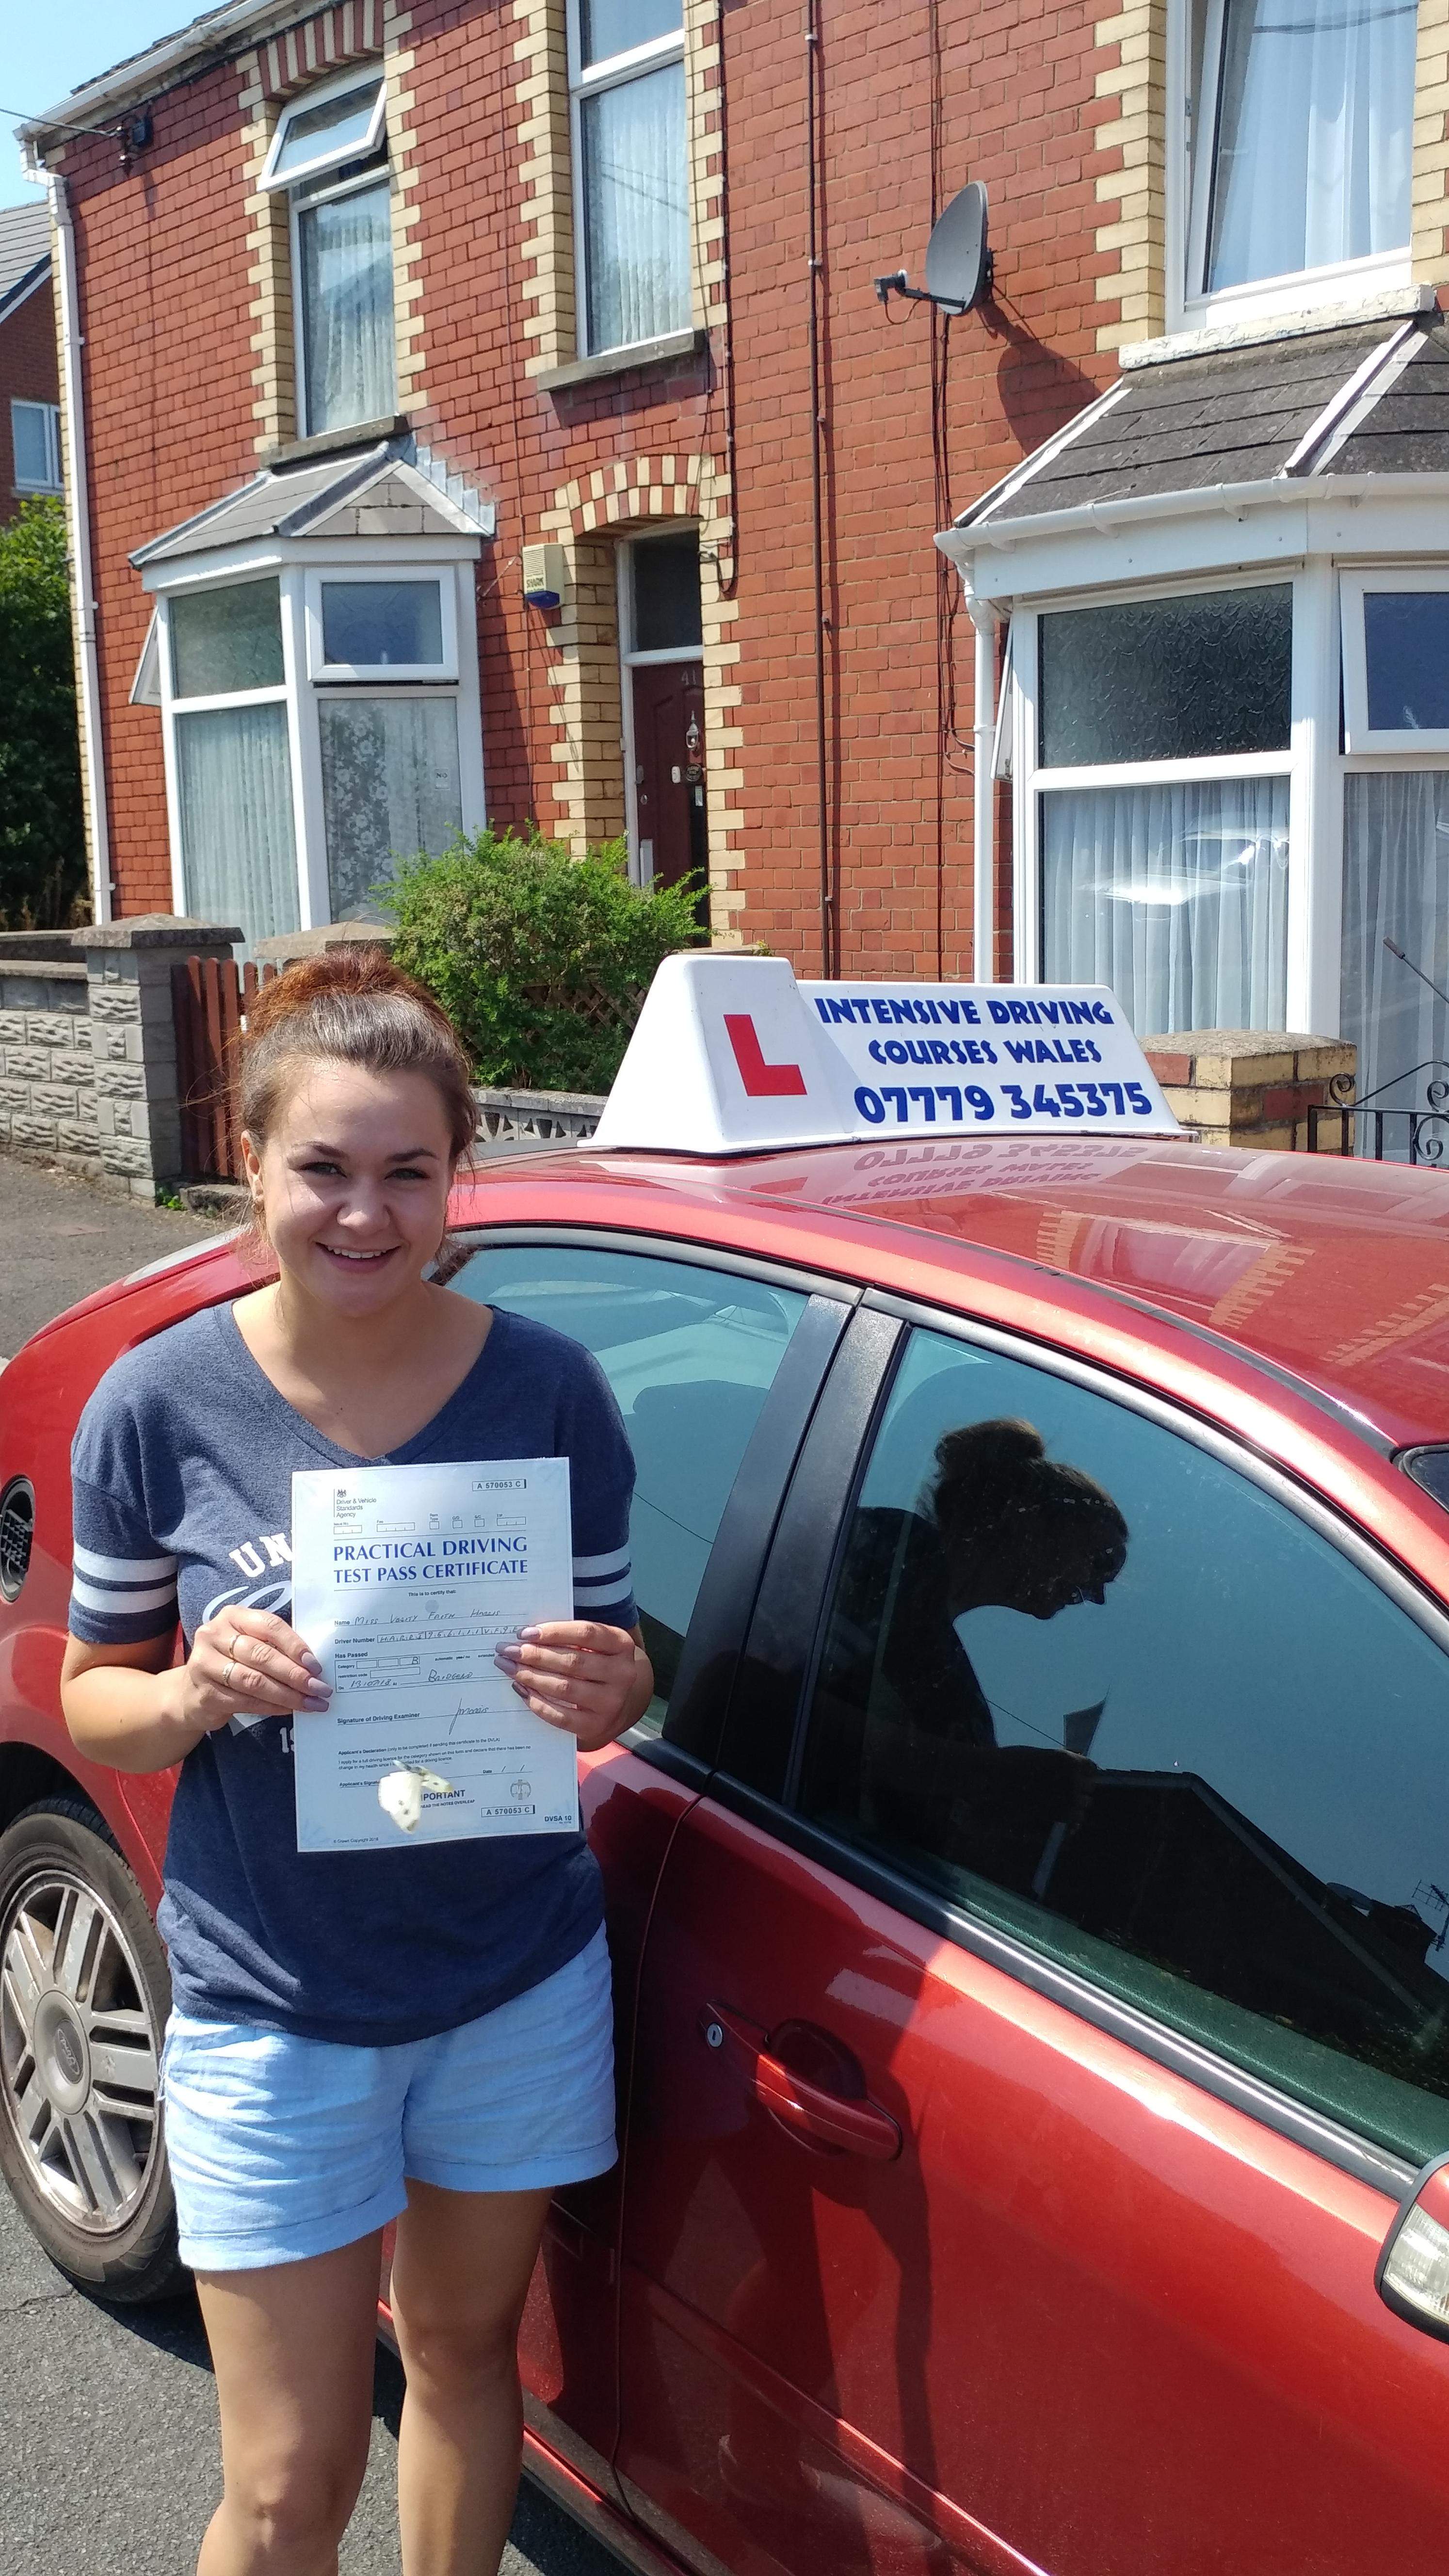 Pass your driving test 1st time with an intensive driving course in Cardiff